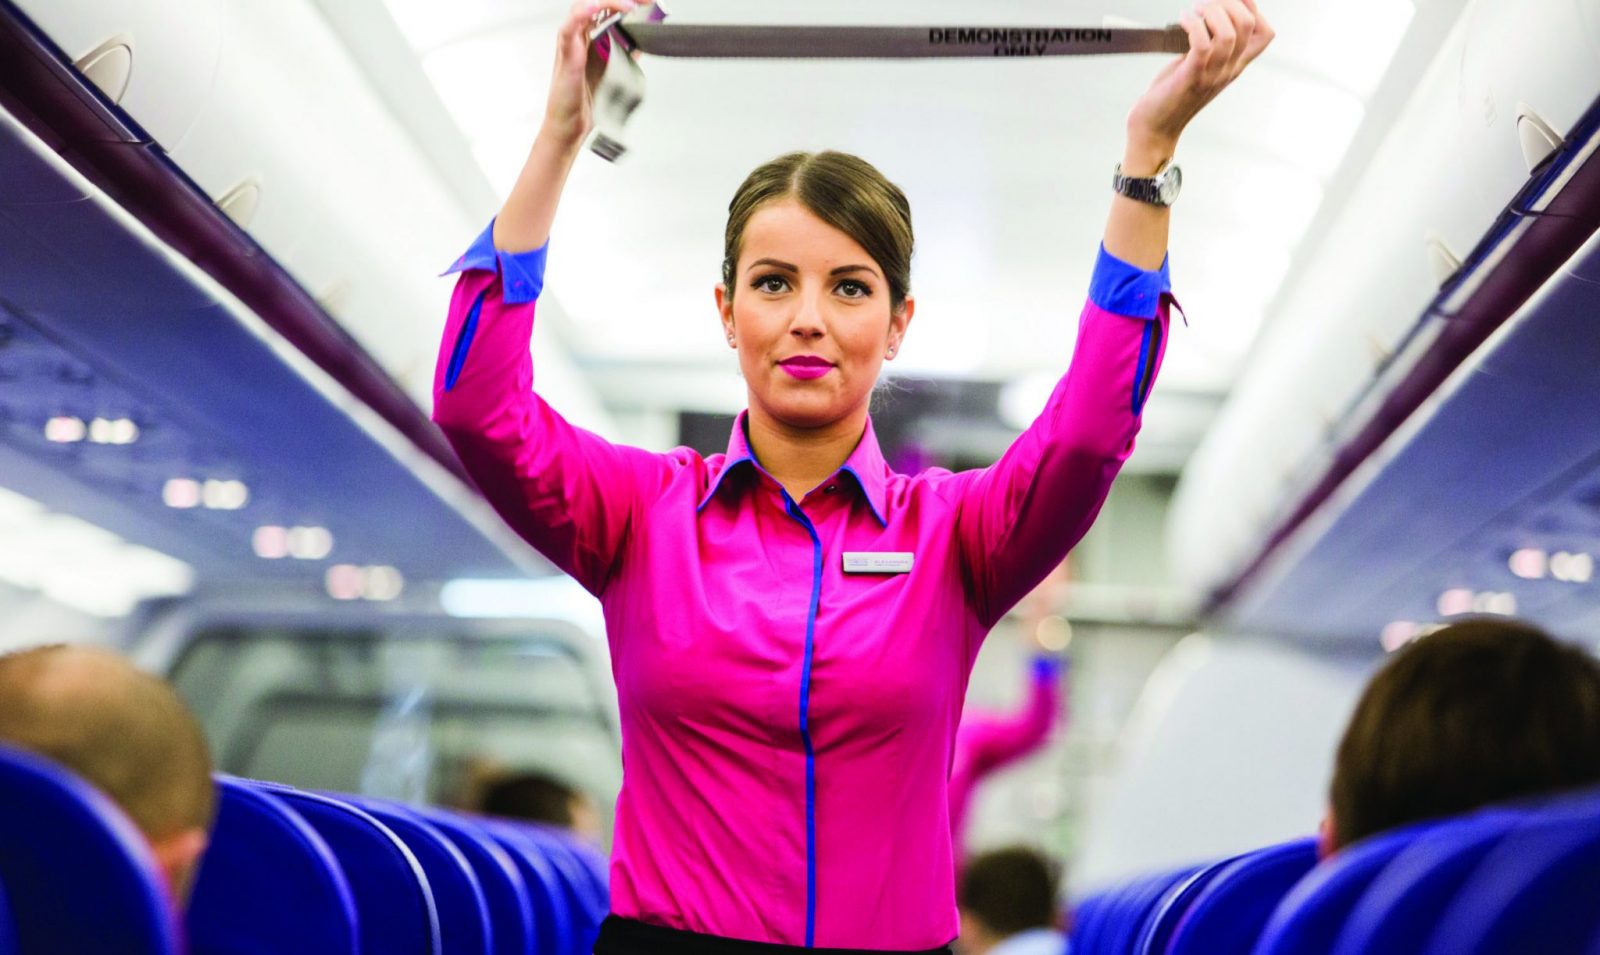 Hungary's Wizz Air Is About to Hire Up To 1,300 Cabin Crew Throughout Europe - Here Are the Details